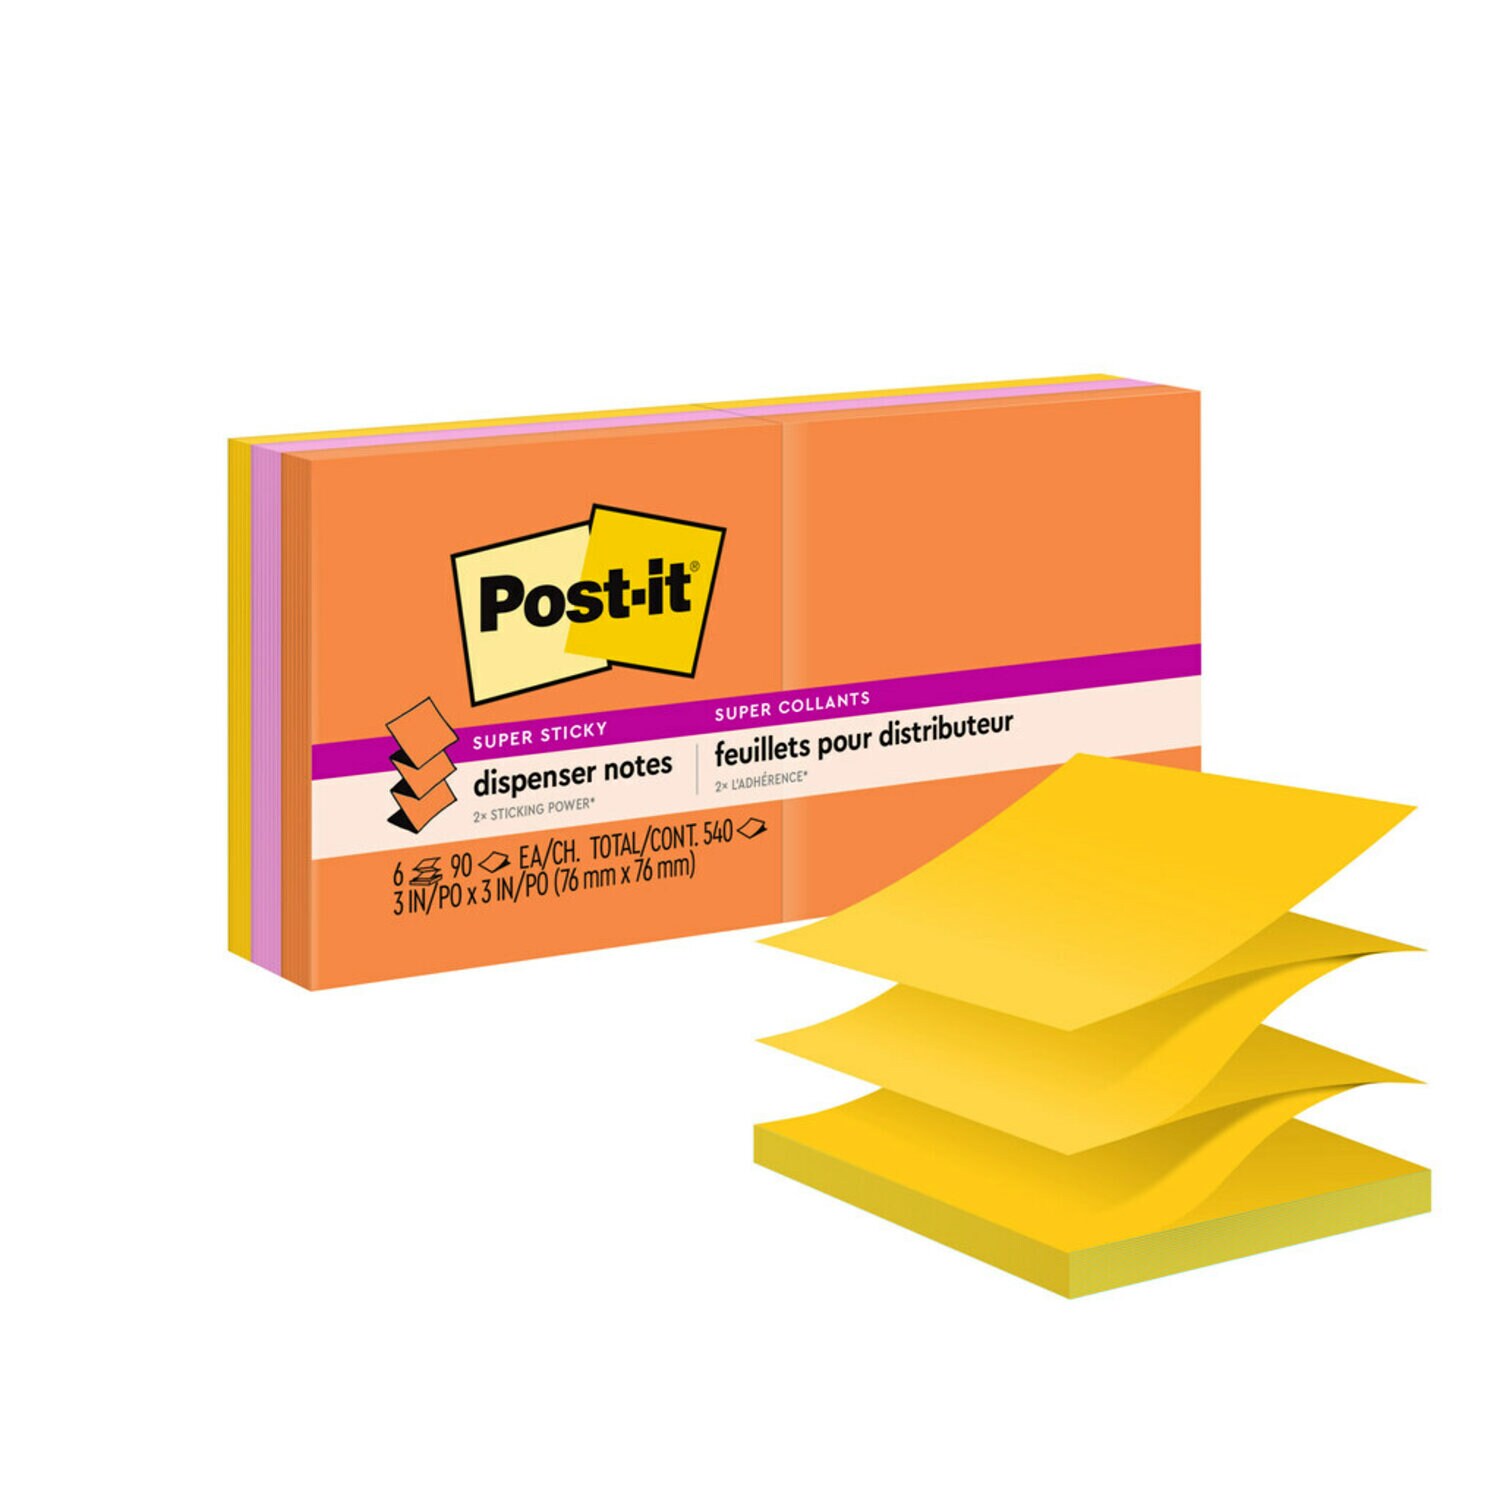 7100230166 - Post-it Super Sticky Dispenser Pop-up Notes R330-6SSUC, 3 in x 3 in (76 mm x 76 mm)